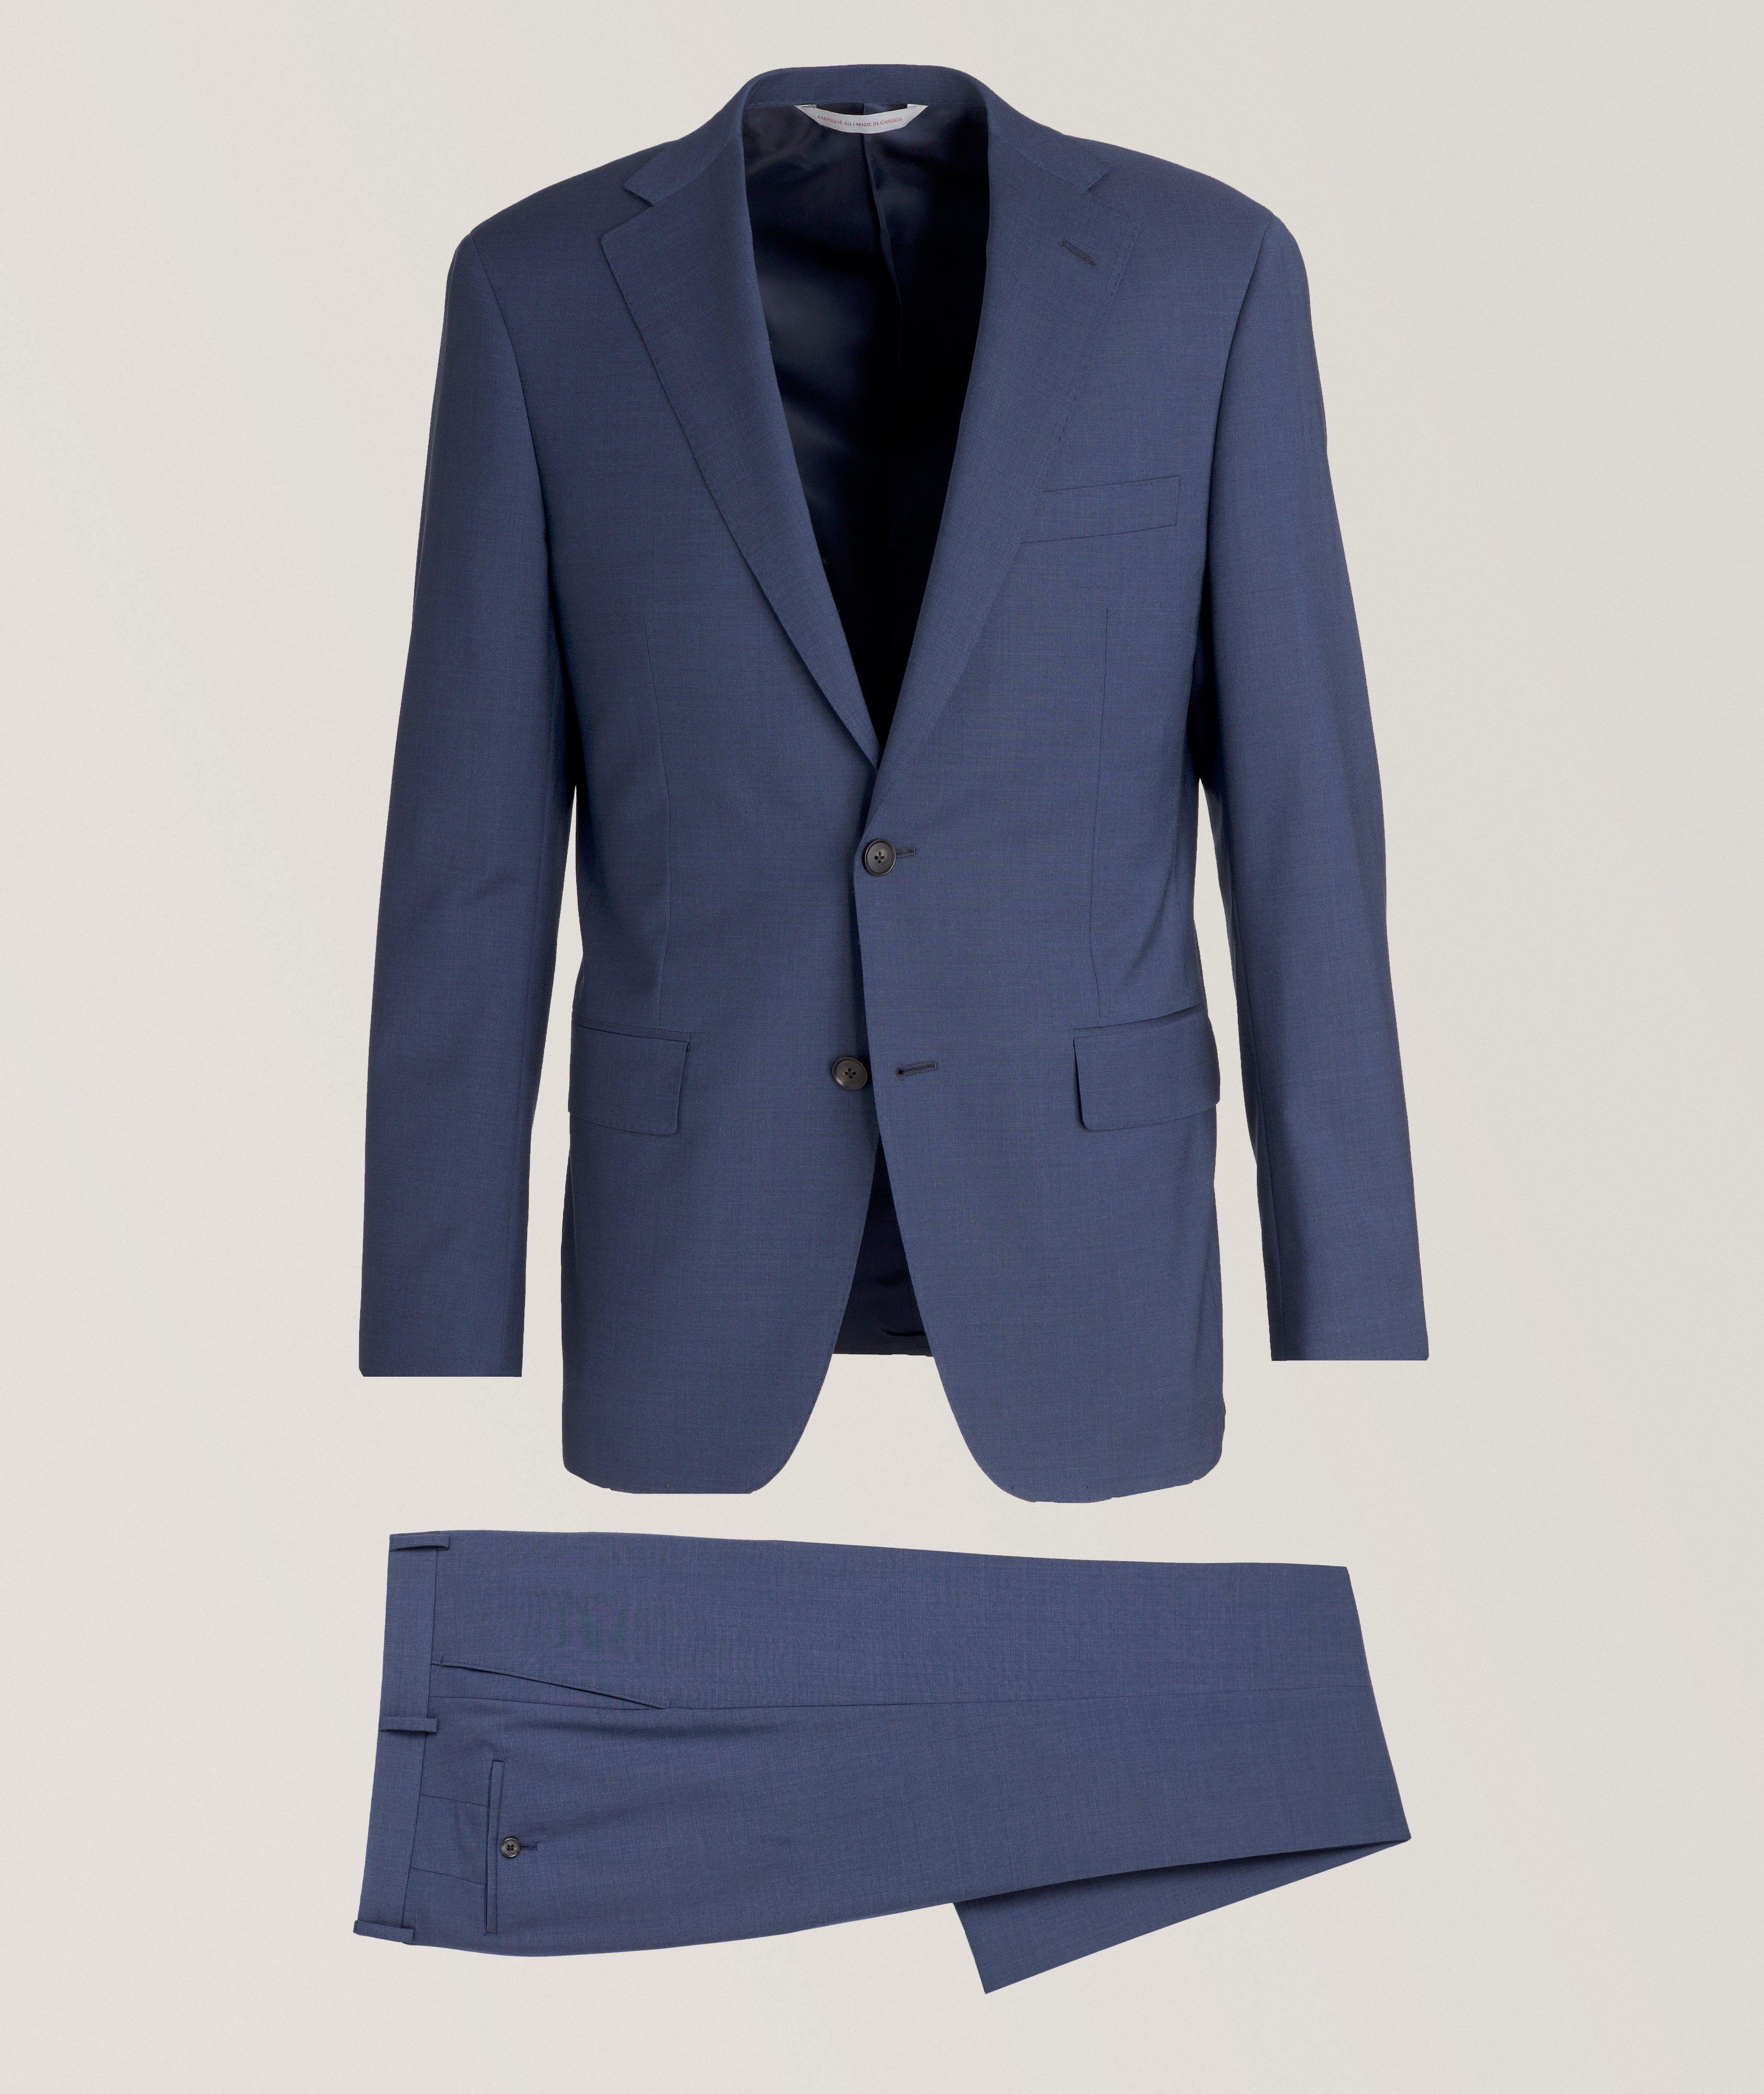 Cosmo Bi-Stretch Wool Suit image 0